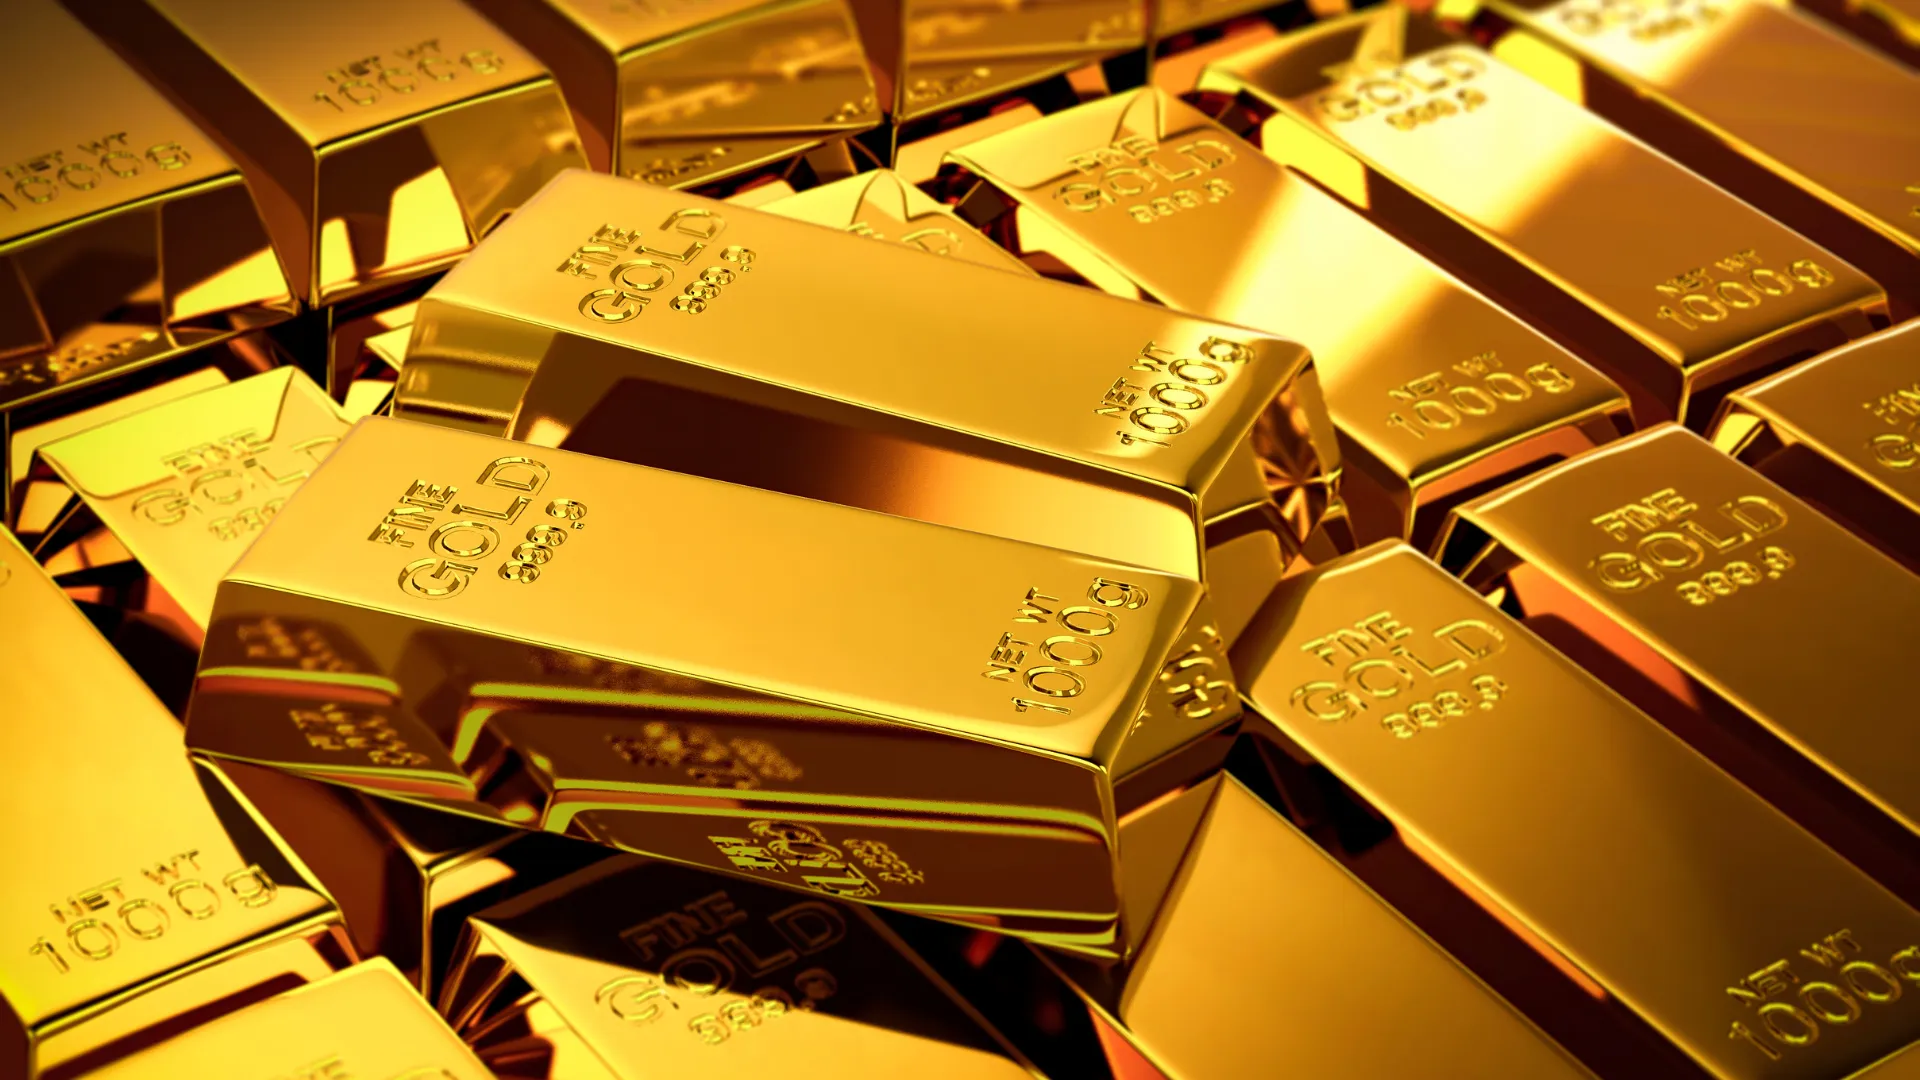 Unlike gold stocks or exchange-traded funds, physical gold offers the advantage of being a tangible asset that you can hold in your hand and store securely.